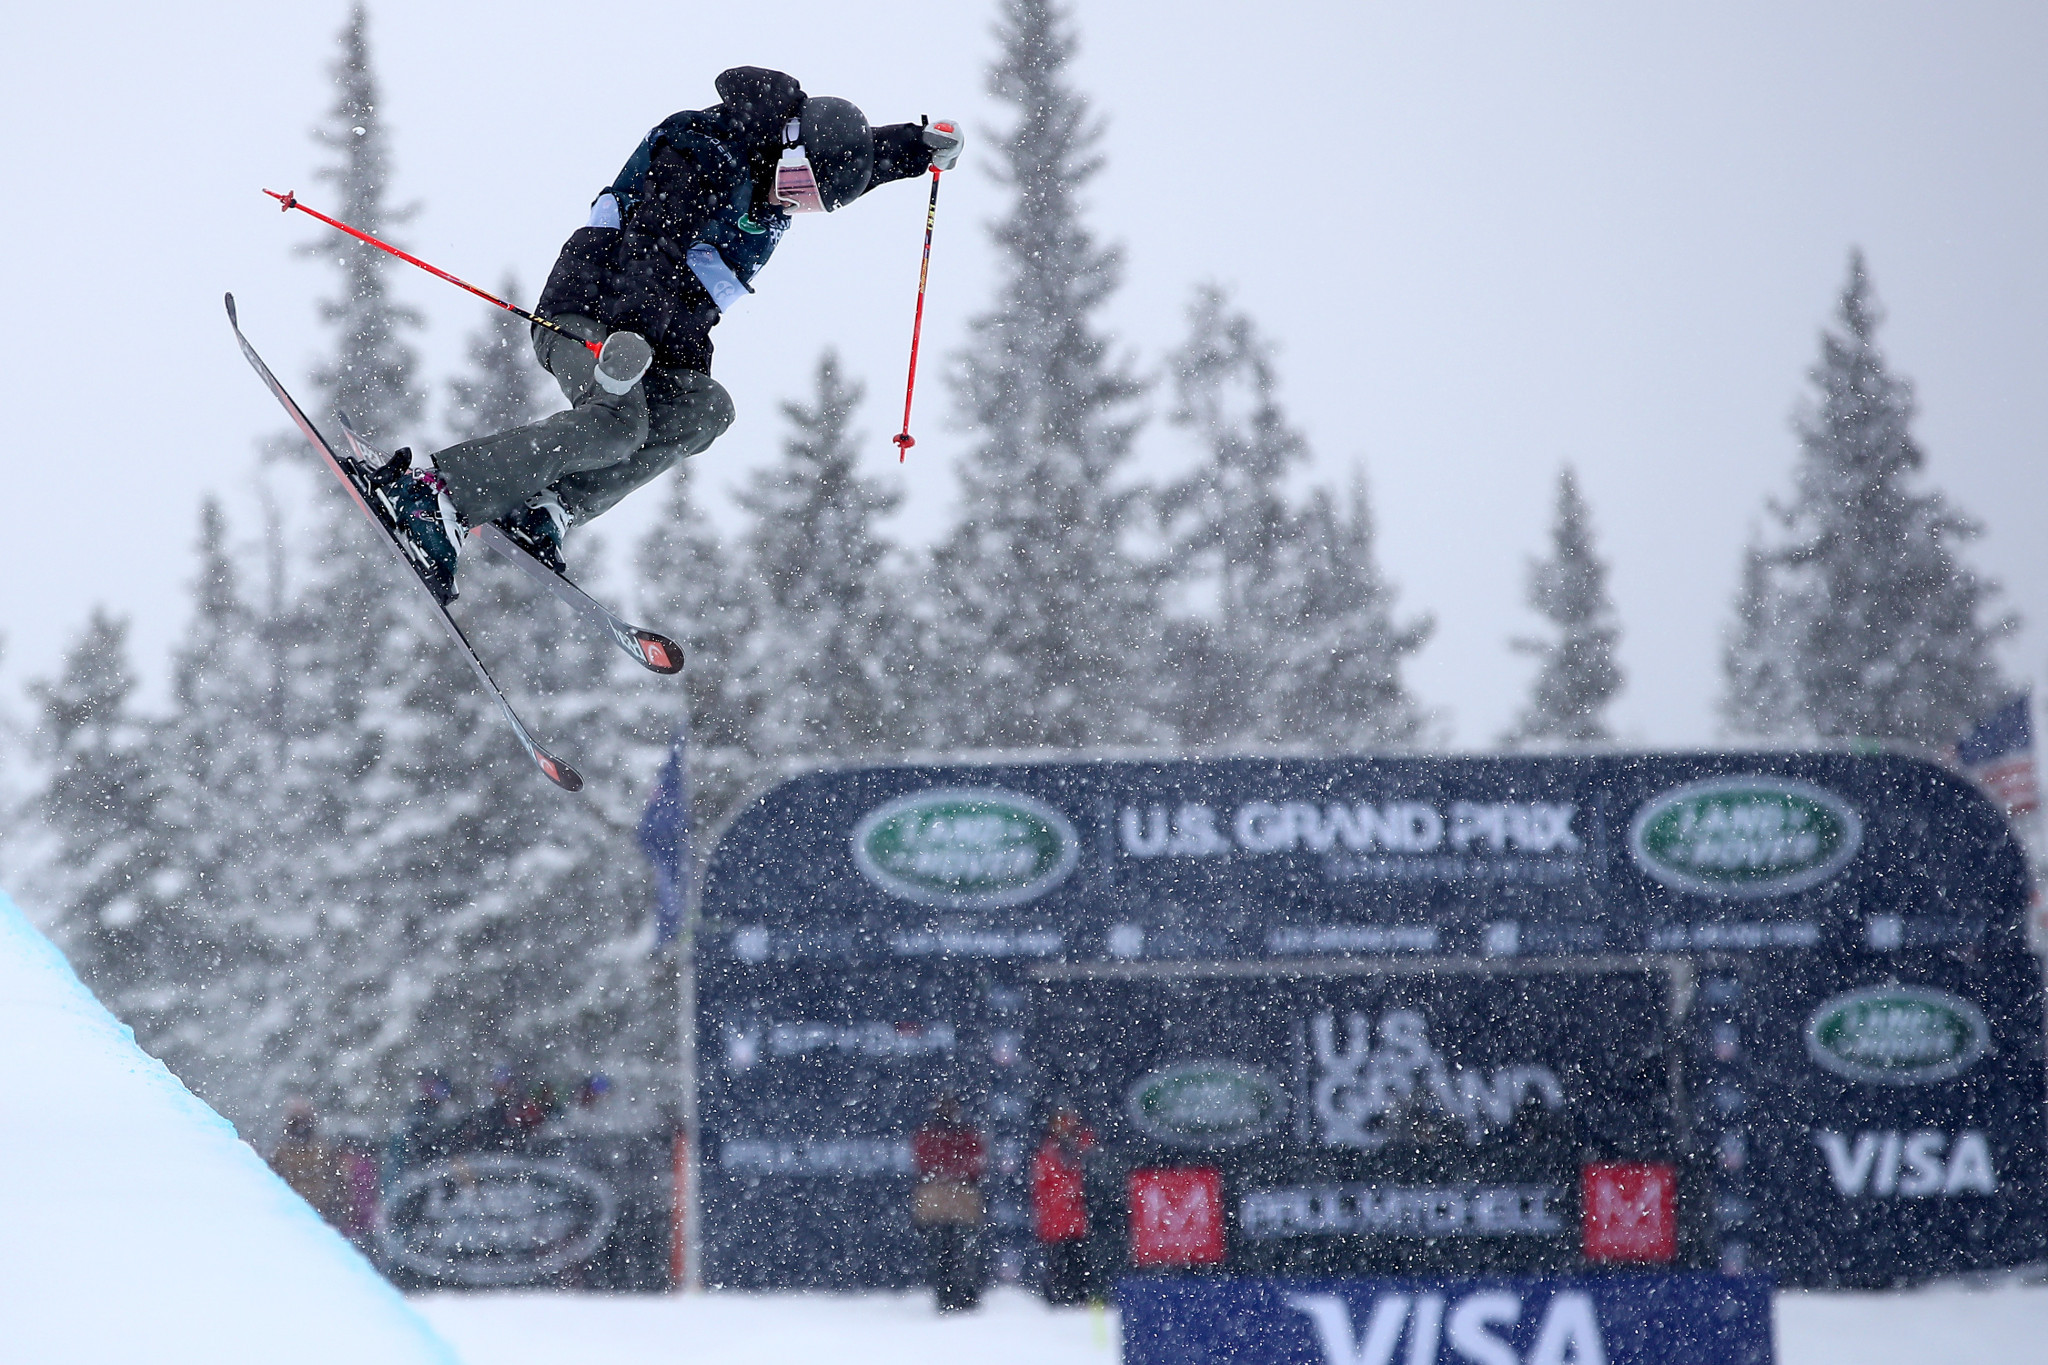 Career-first win for teen Atkin at FIS Freestyle Skiing Halfpipe World Cup in Copper Mountain